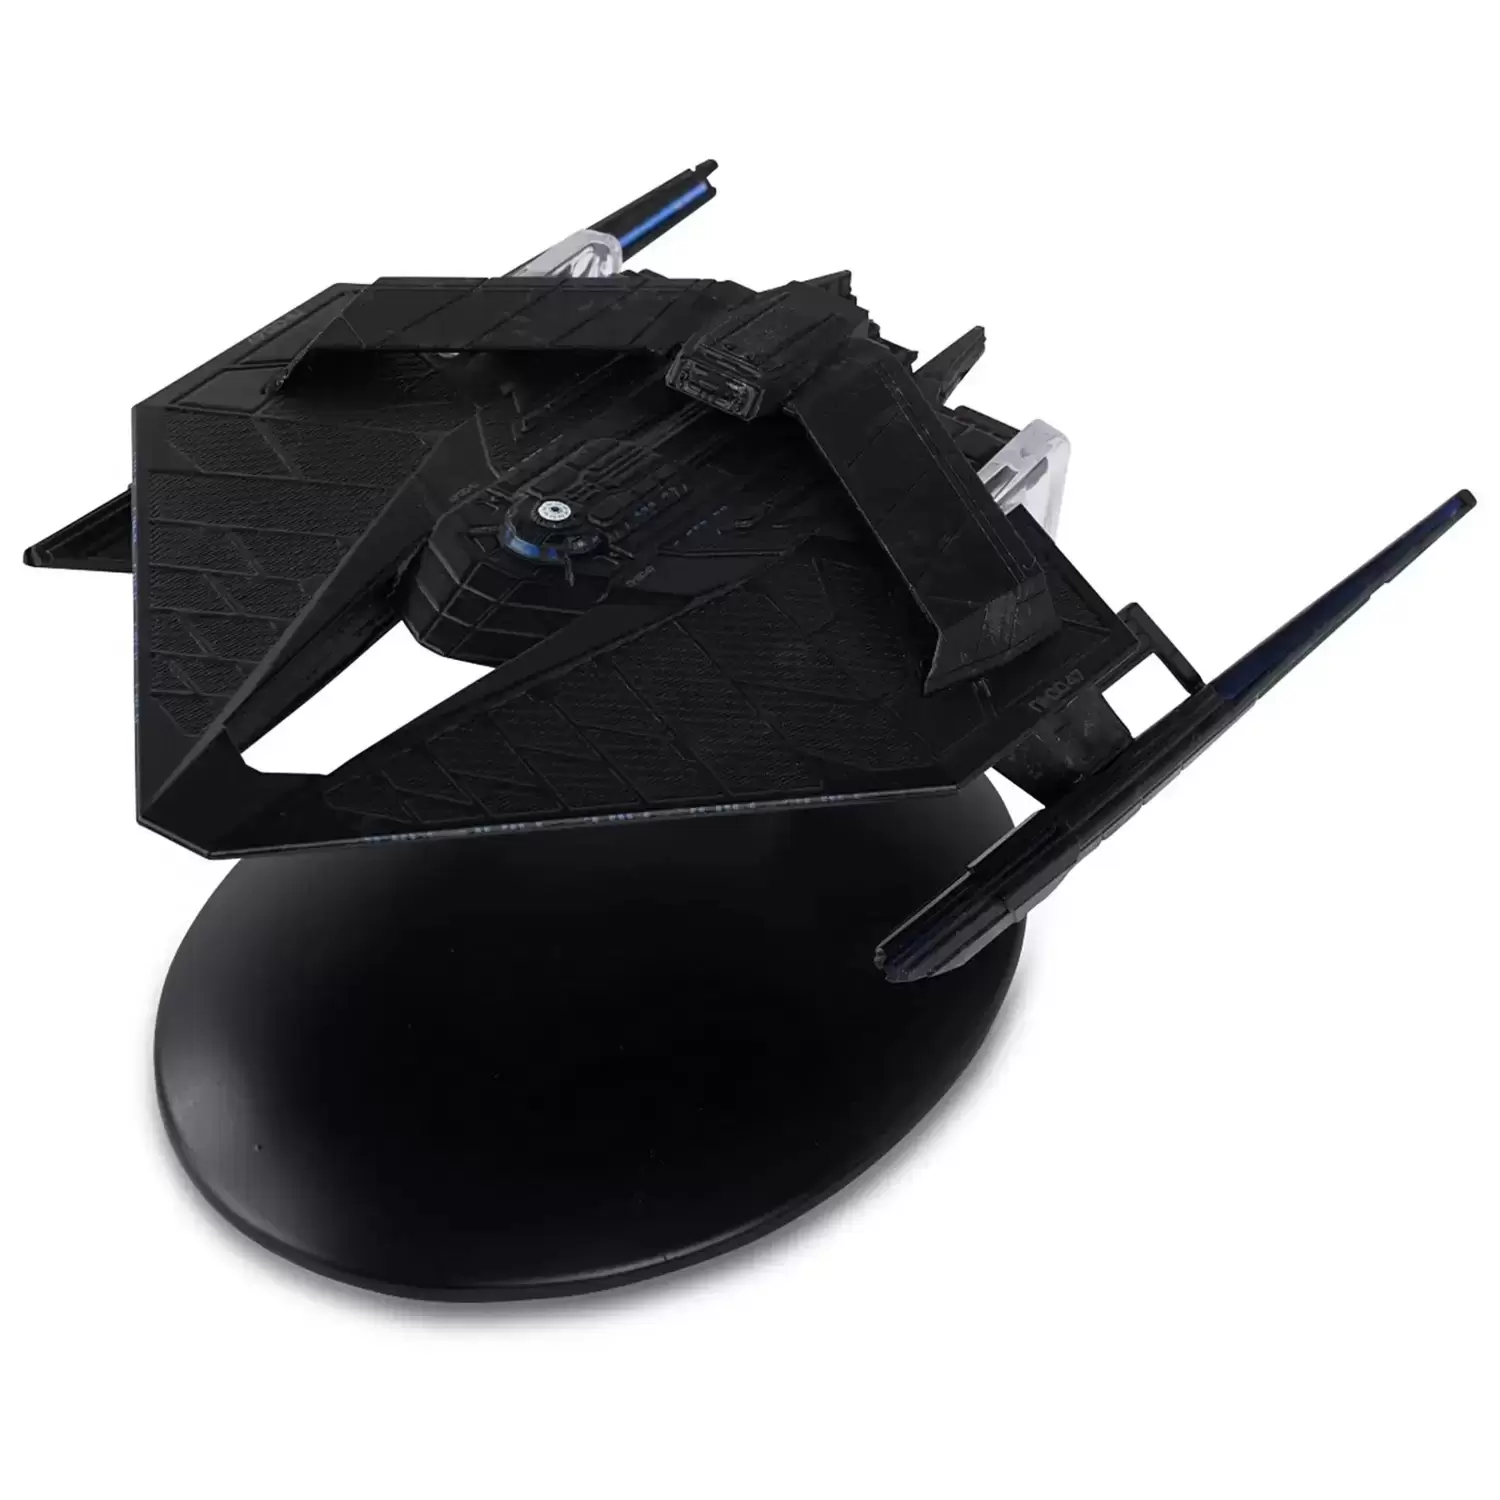 Star Trek Discovery The Official Starships Collection - Section 31 Shiva-class NI-0047